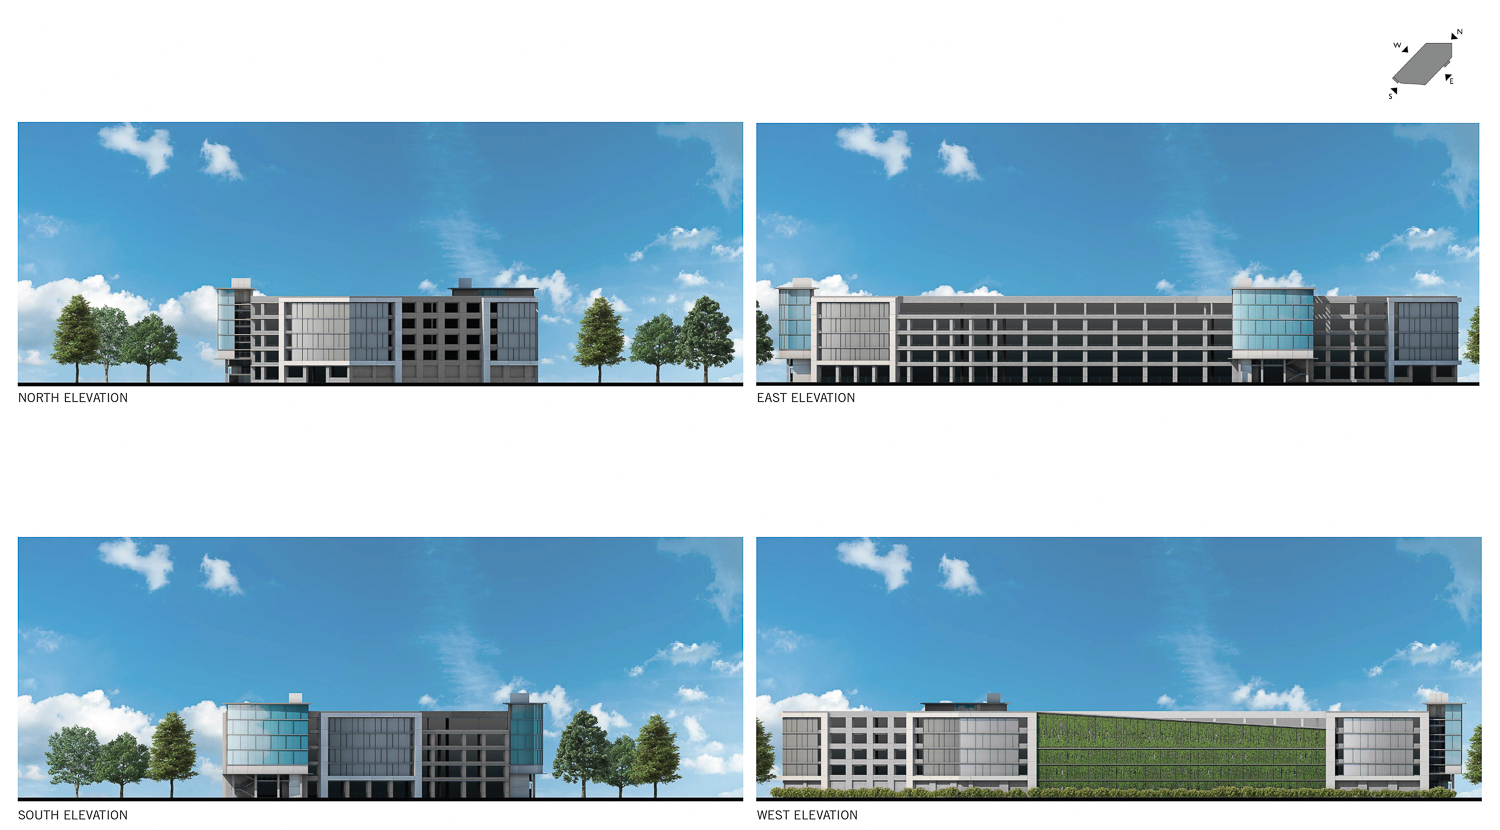 567 Airport Boulevard parking structure elevations, illustration by DES Architects and Engineers